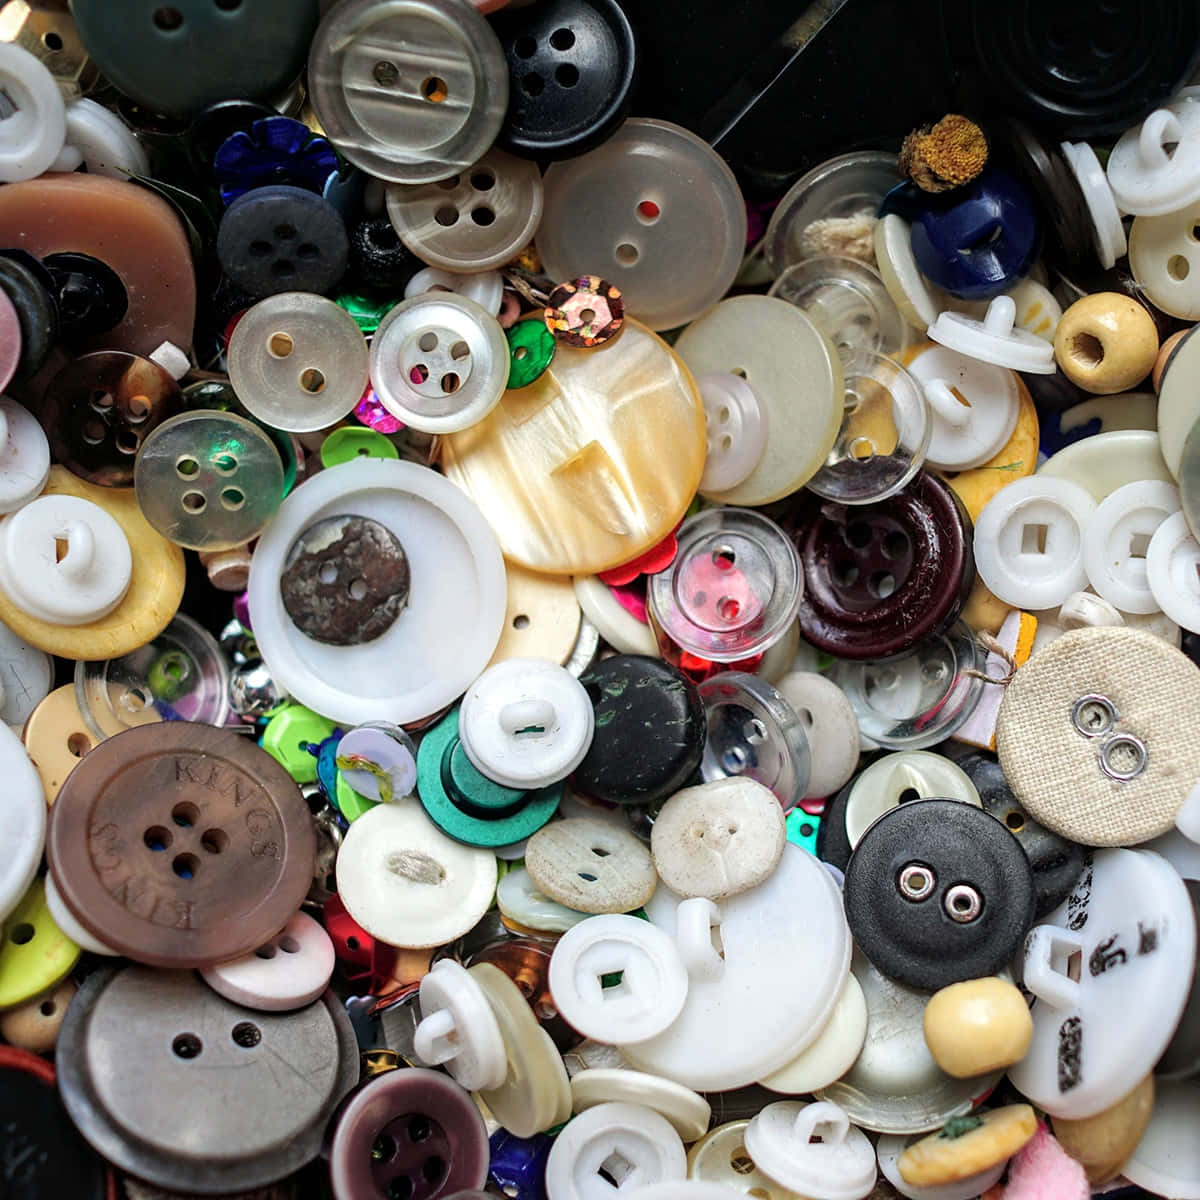 "Traditional Buttons for Durable Crafting"